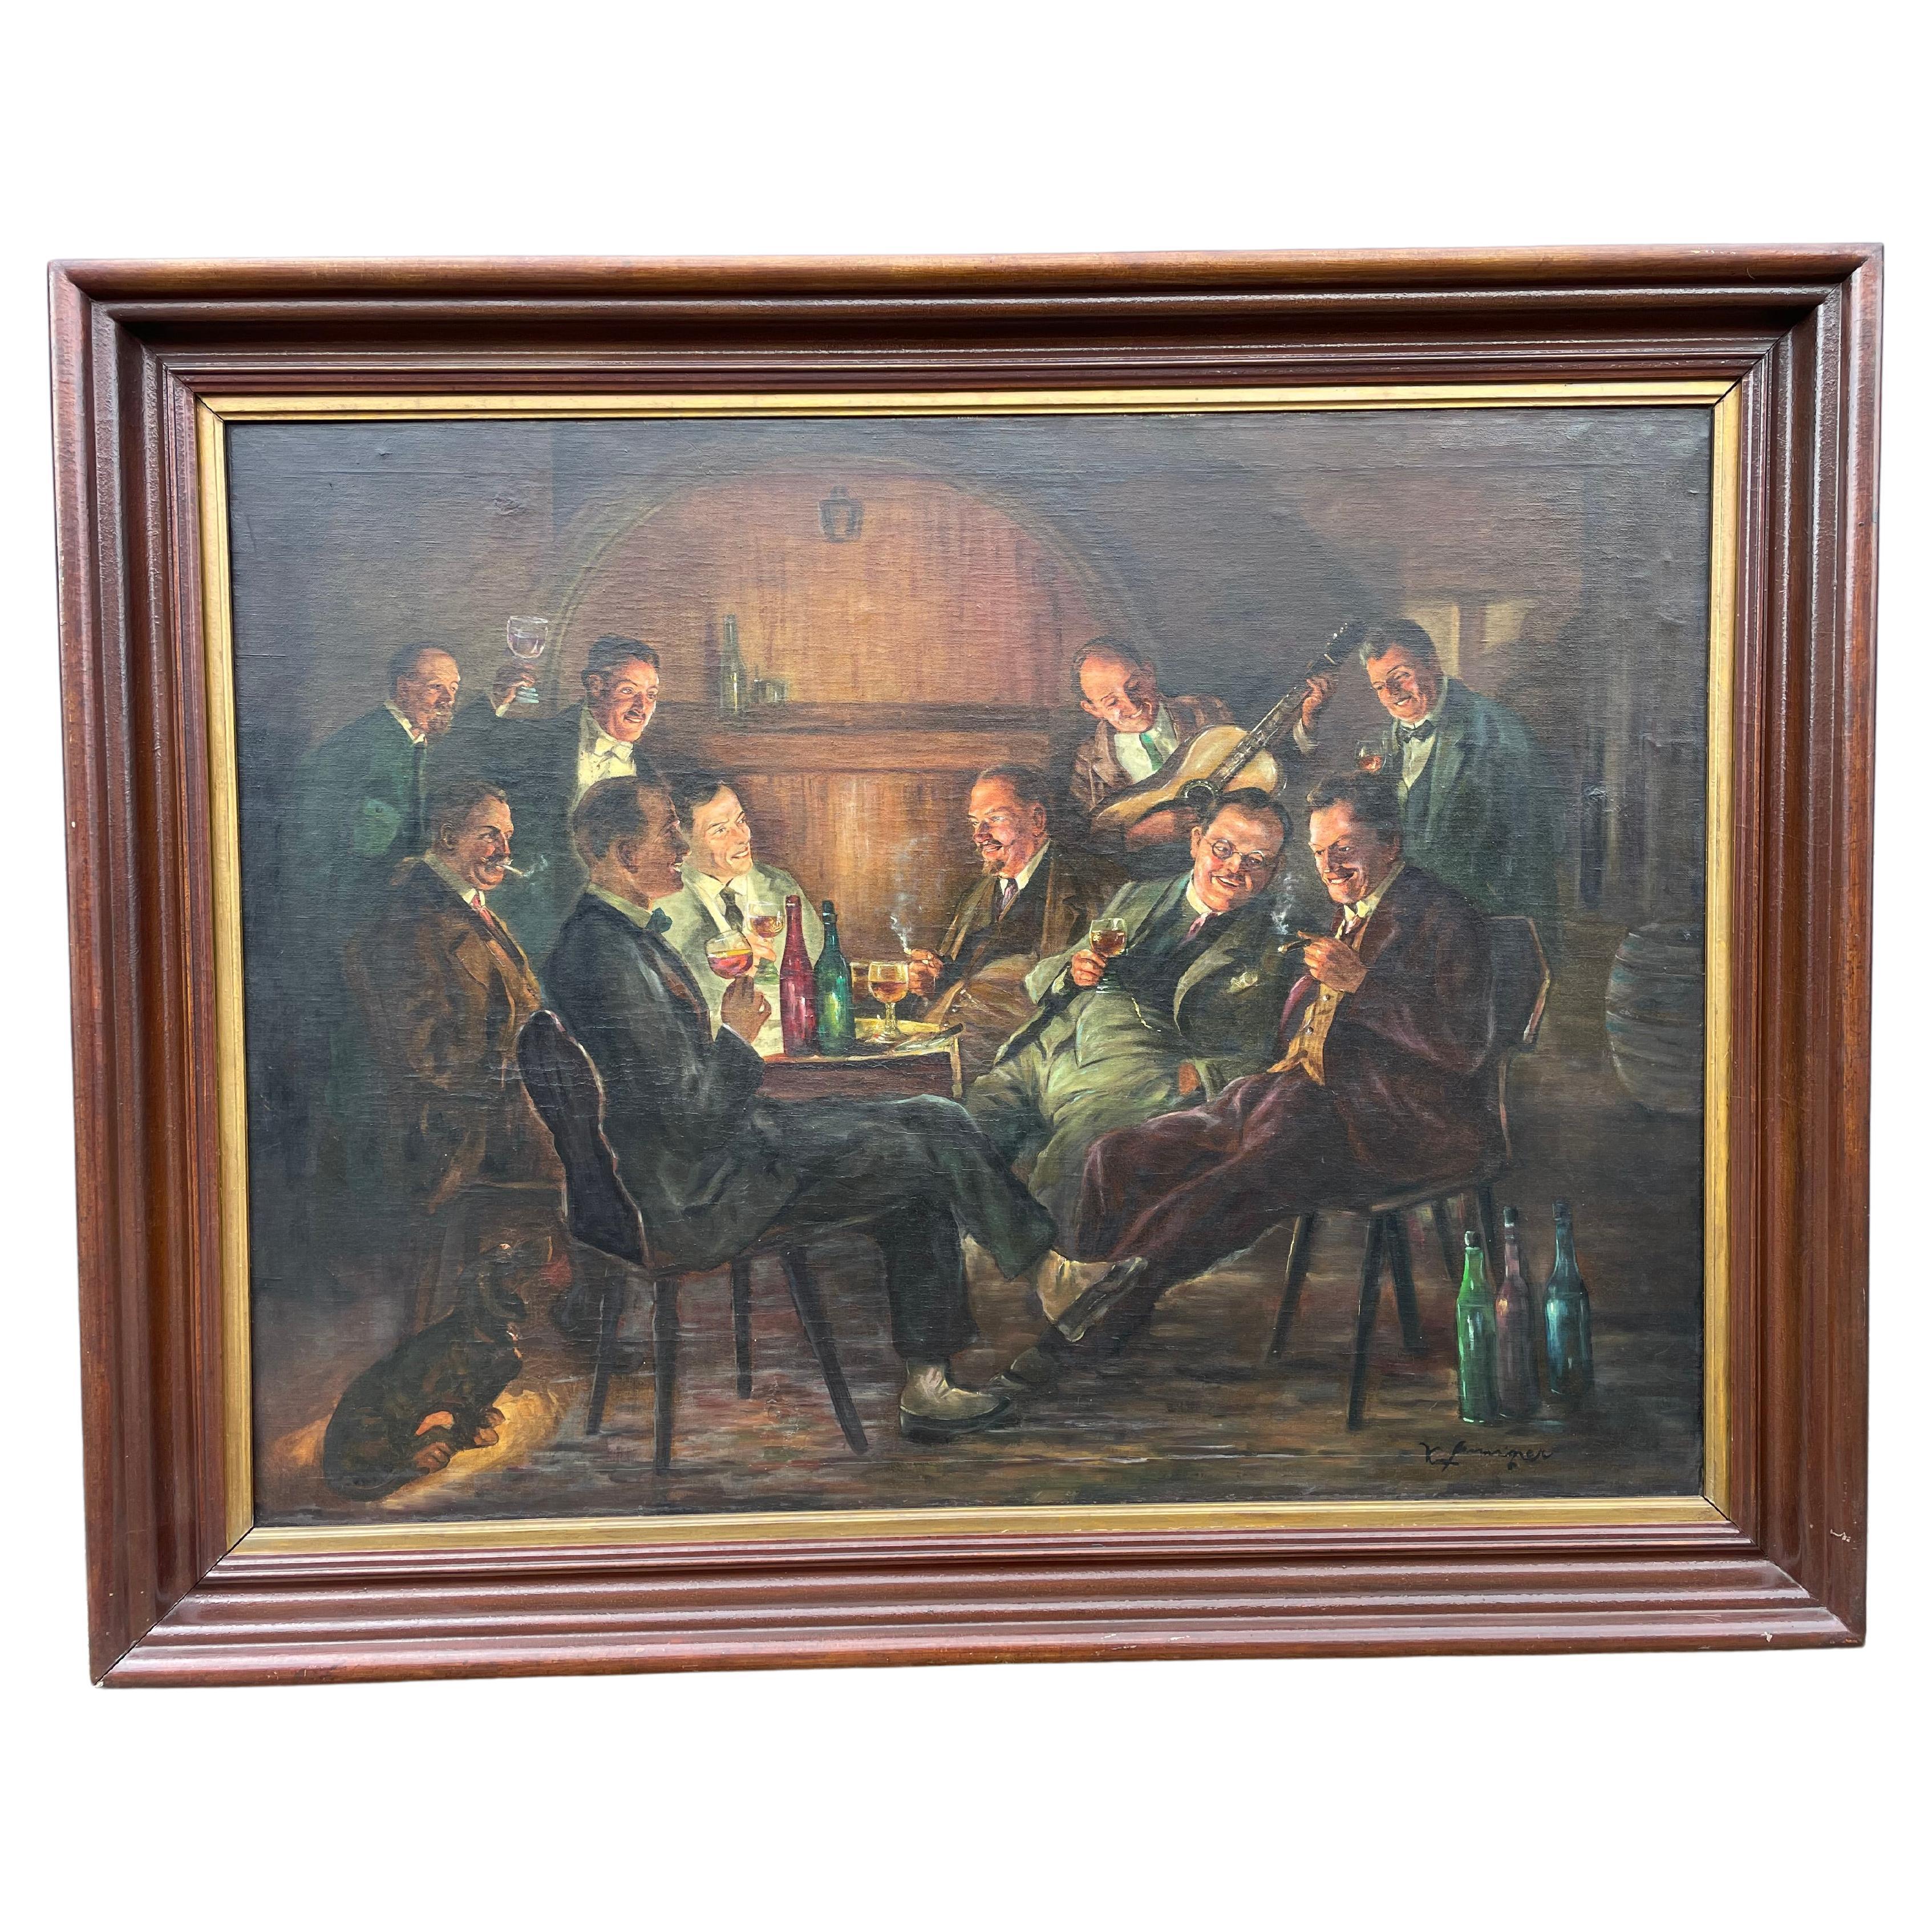 Large Antique Oil on Canvas Painting "Celebration", Men Drinking Wine & Smoking For Sale